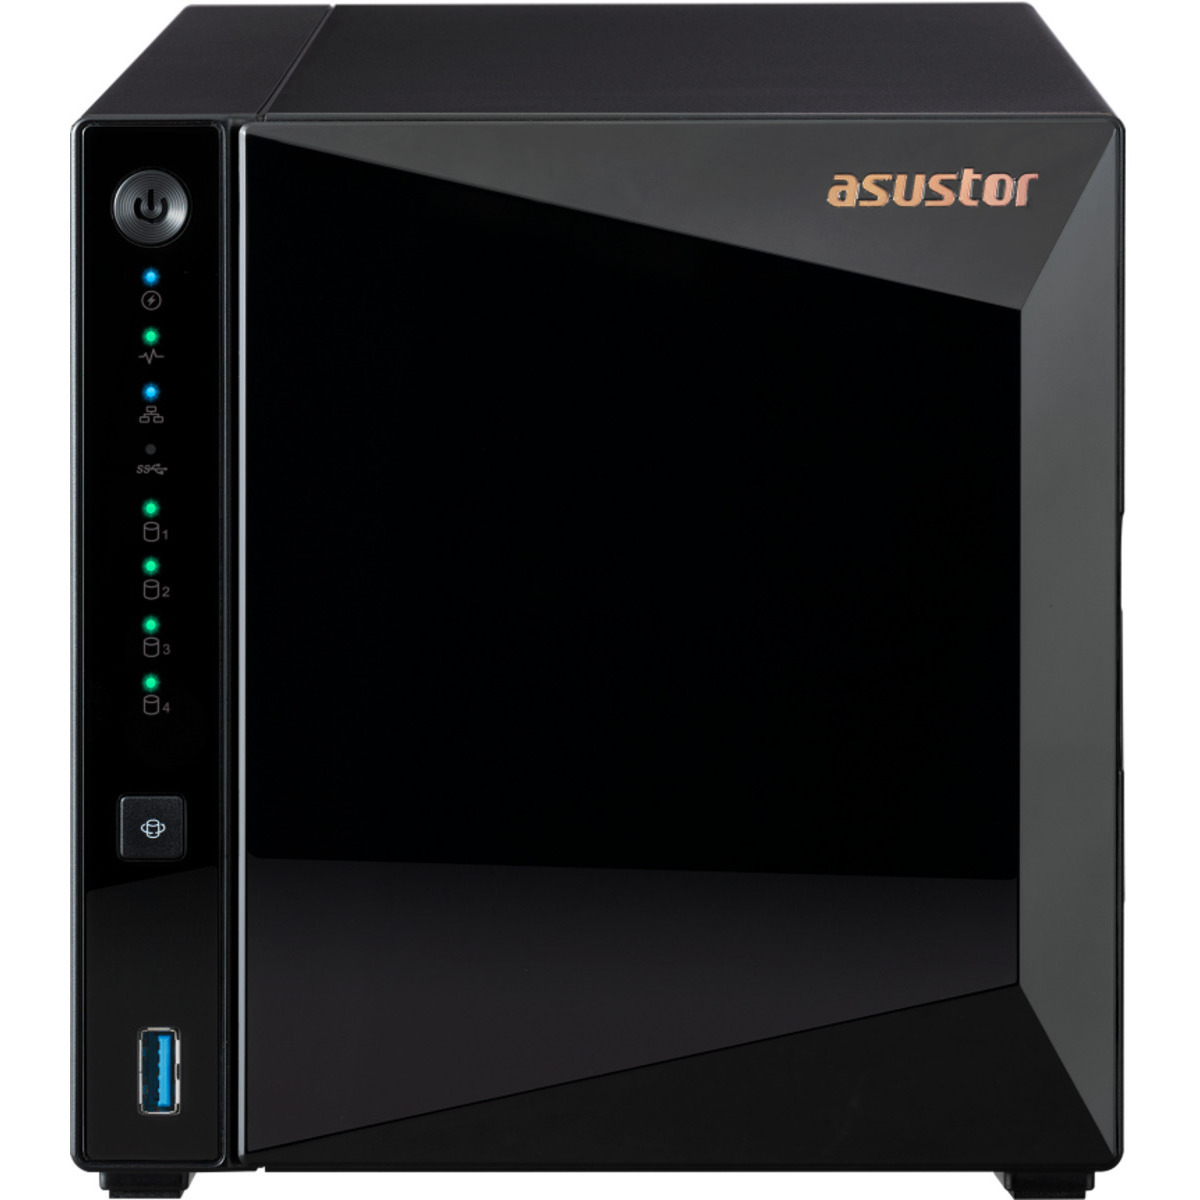 ASUSTOR DRIVESTOR 4 Pro Gen2 AS3304T v2 24tb 4-Bay Desktop Personal / Basic Home / Small Office NAS - Network Attached Storage Device 3x8tb Samsung 870 QVO MZ-77Q8T0 2.5 560/530MB/s SATA 6Gb/s SSD CONSUMER Class Drives Installed - Burn-In Tested - ON SALE DRIVESTOR 4 Pro Gen2 AS3304T v2